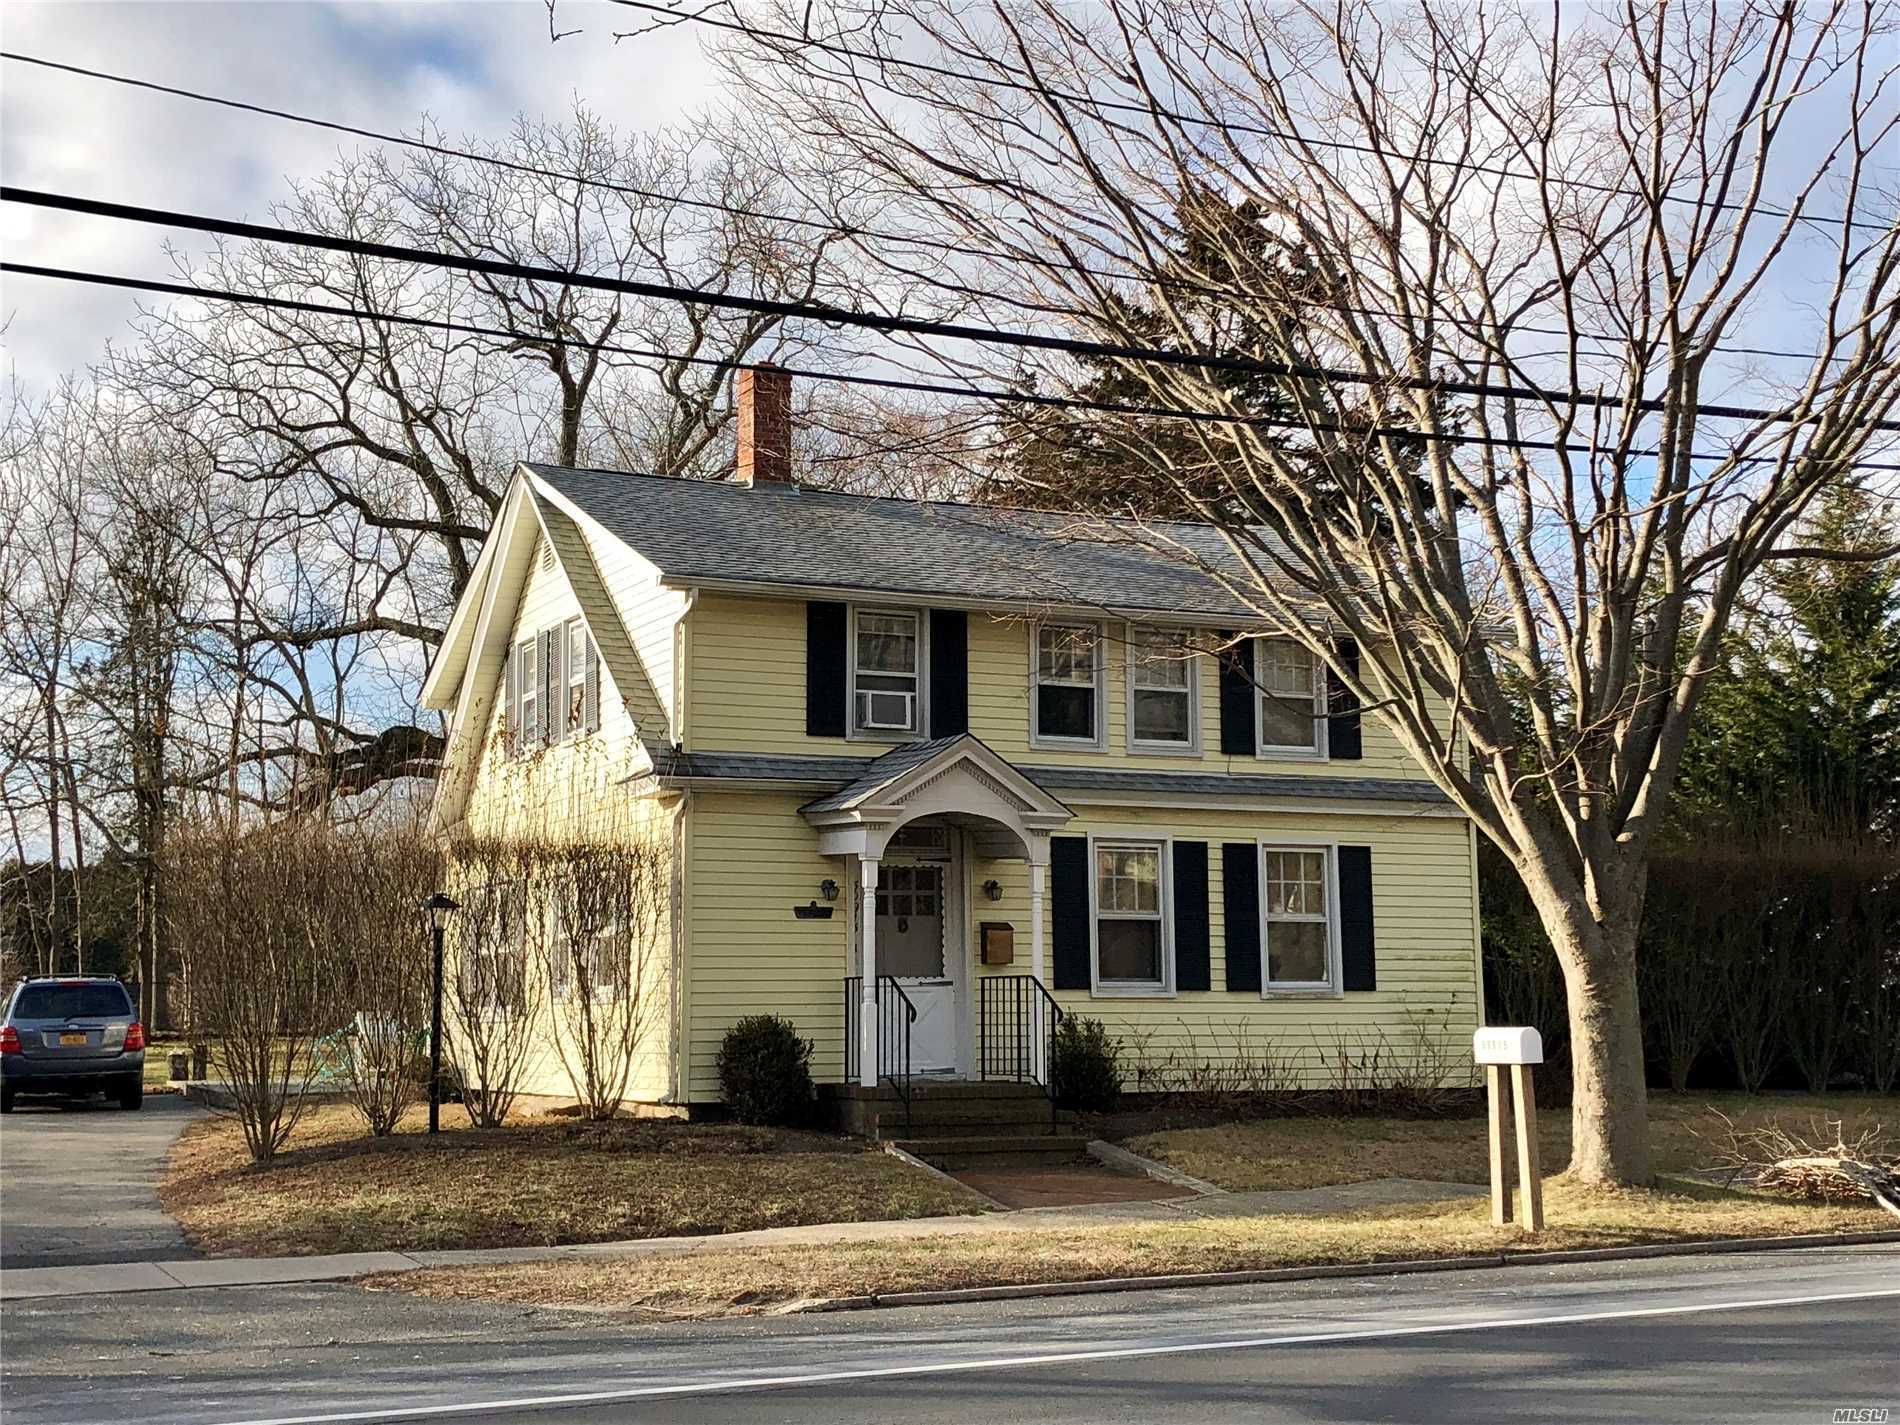 Charming 4 Bedroom, 2 Bath Cape Home Located Near The Heart Of Downtown Southold. Zoned Residential Office.